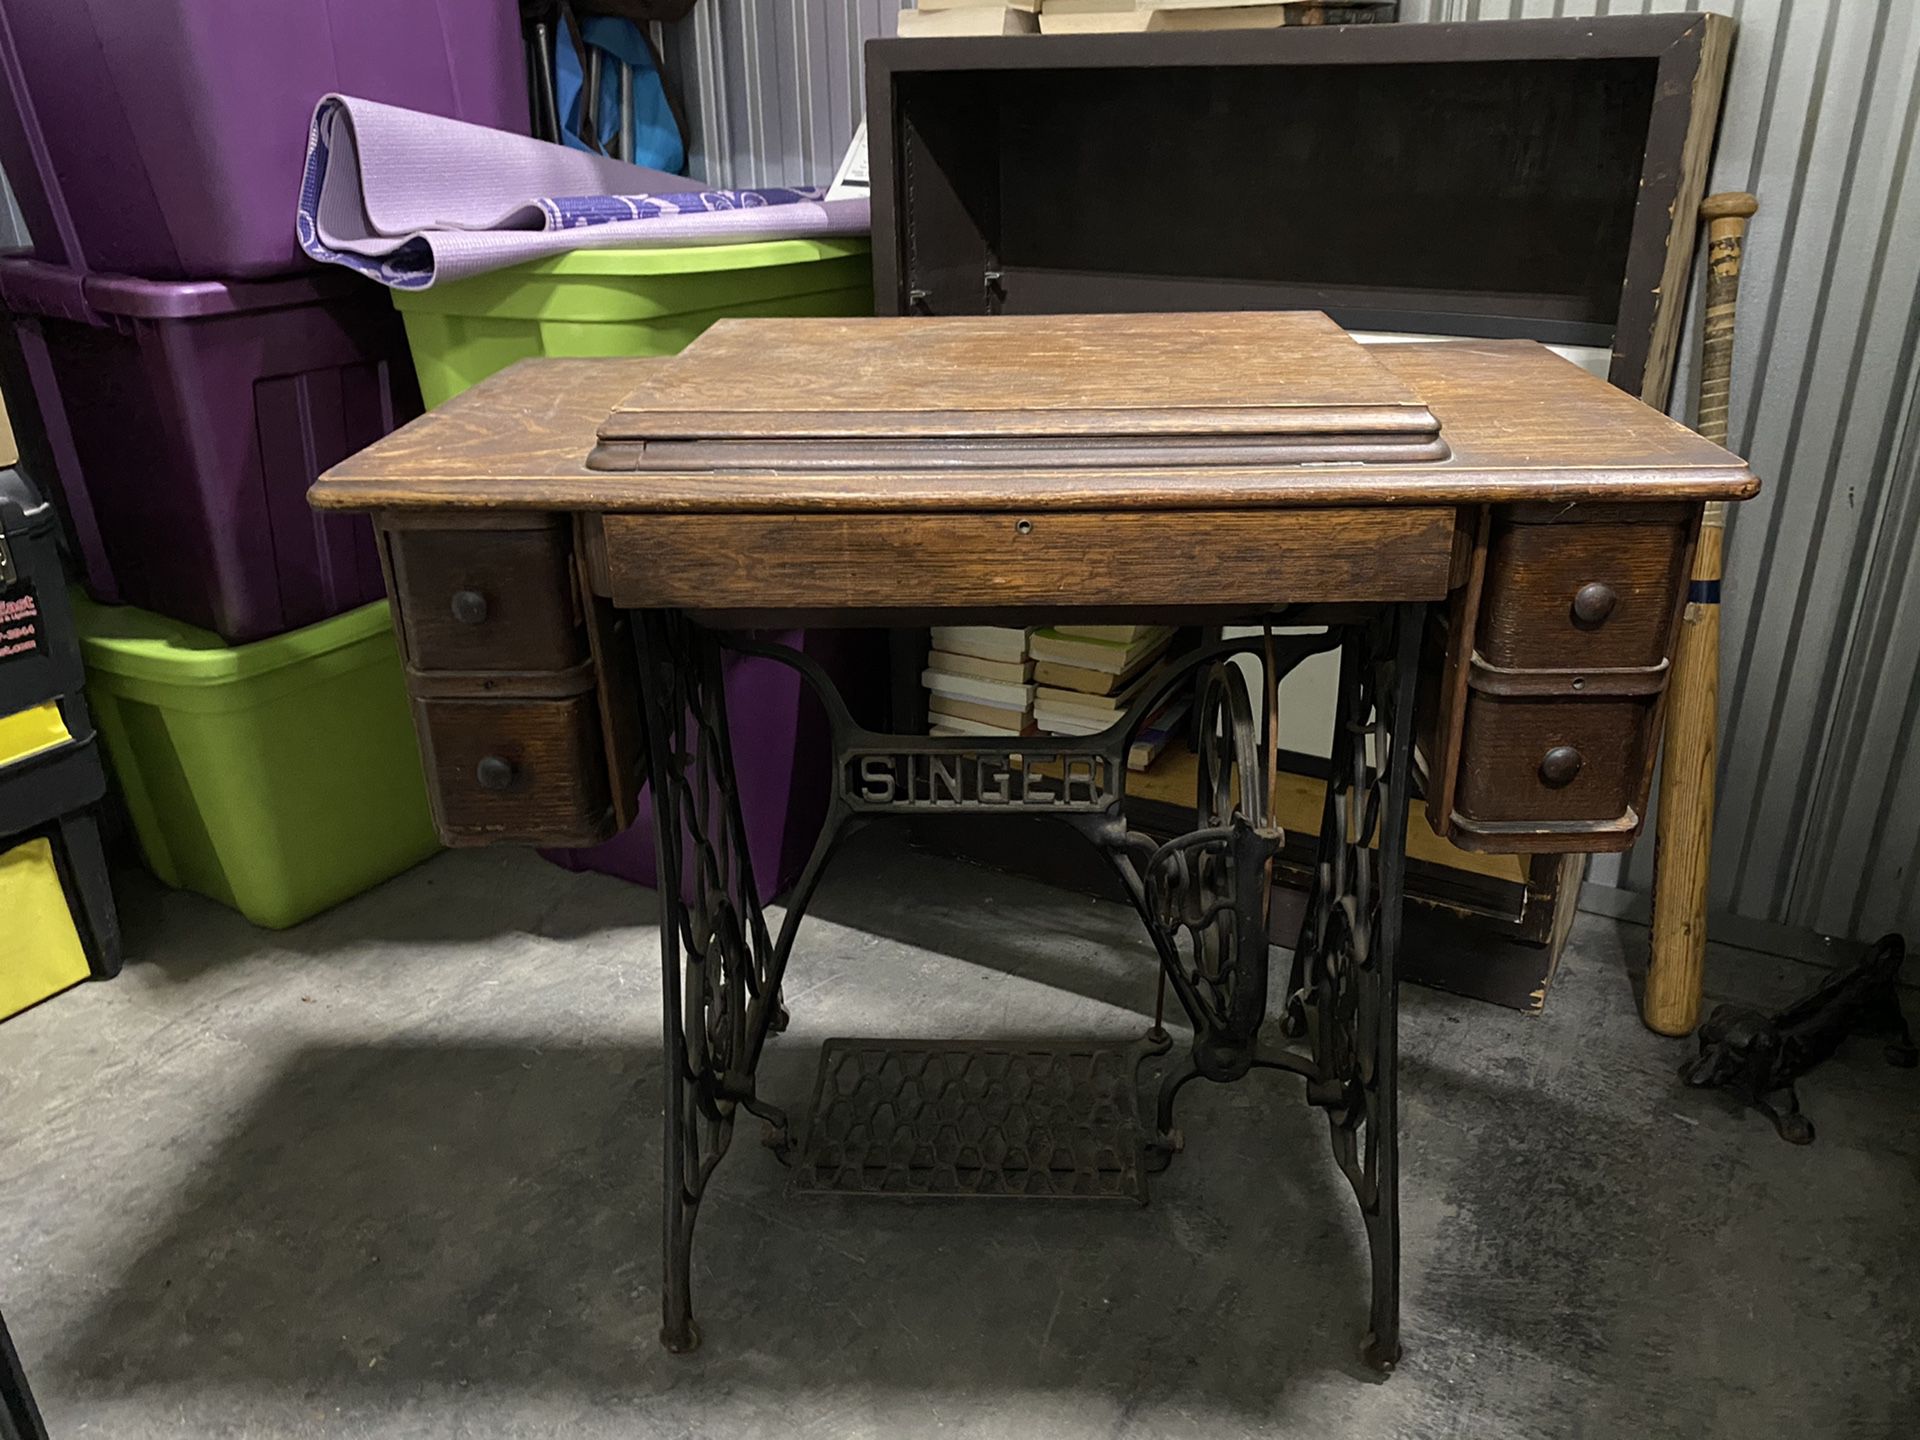 Antique Singer sewing table with machine